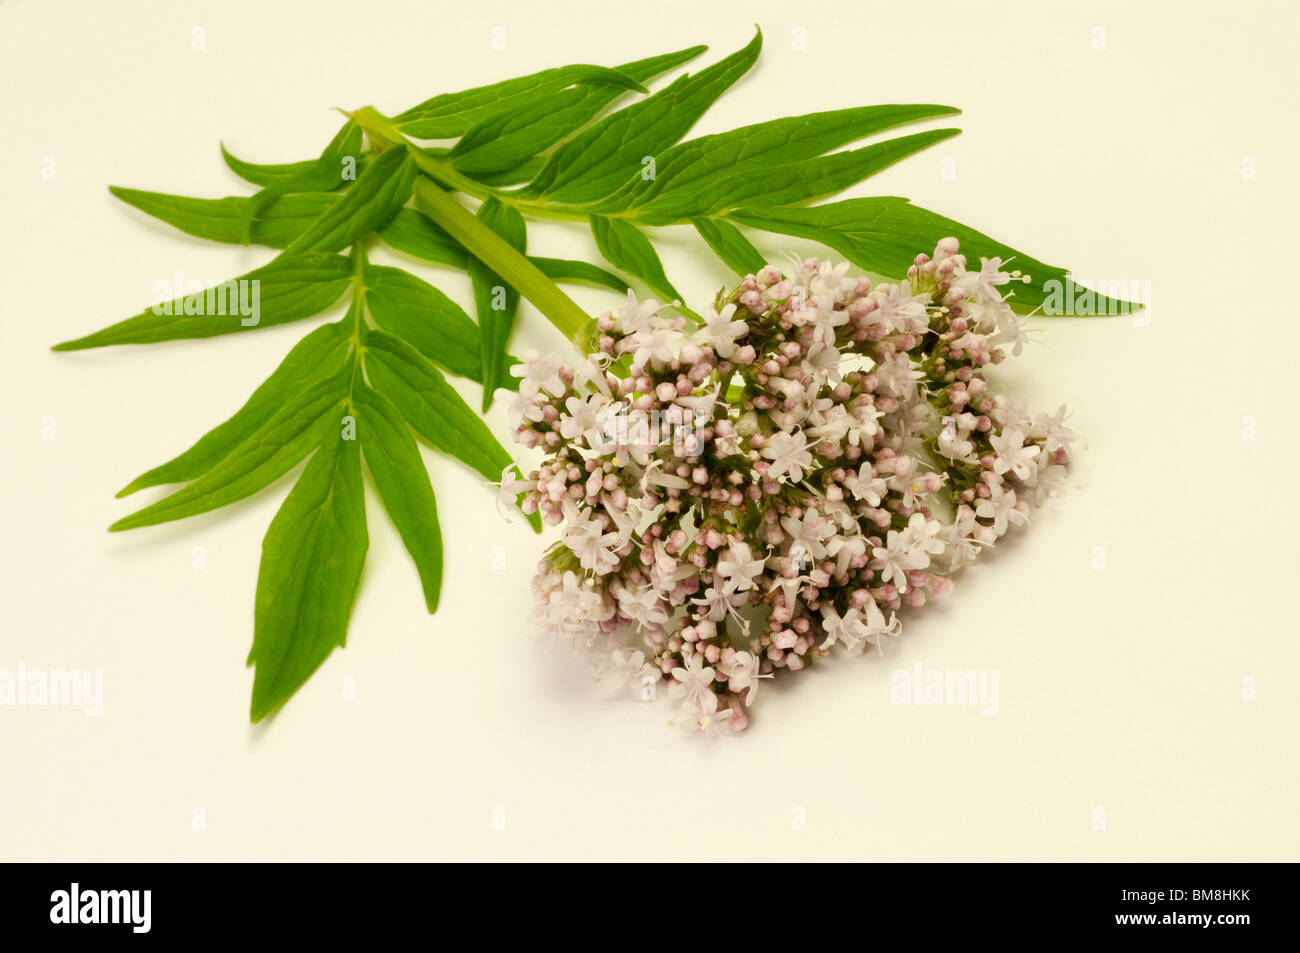 Common Valerian (Valeriana officinalis), inflorescence and leaves, studio picture. Stock Photo